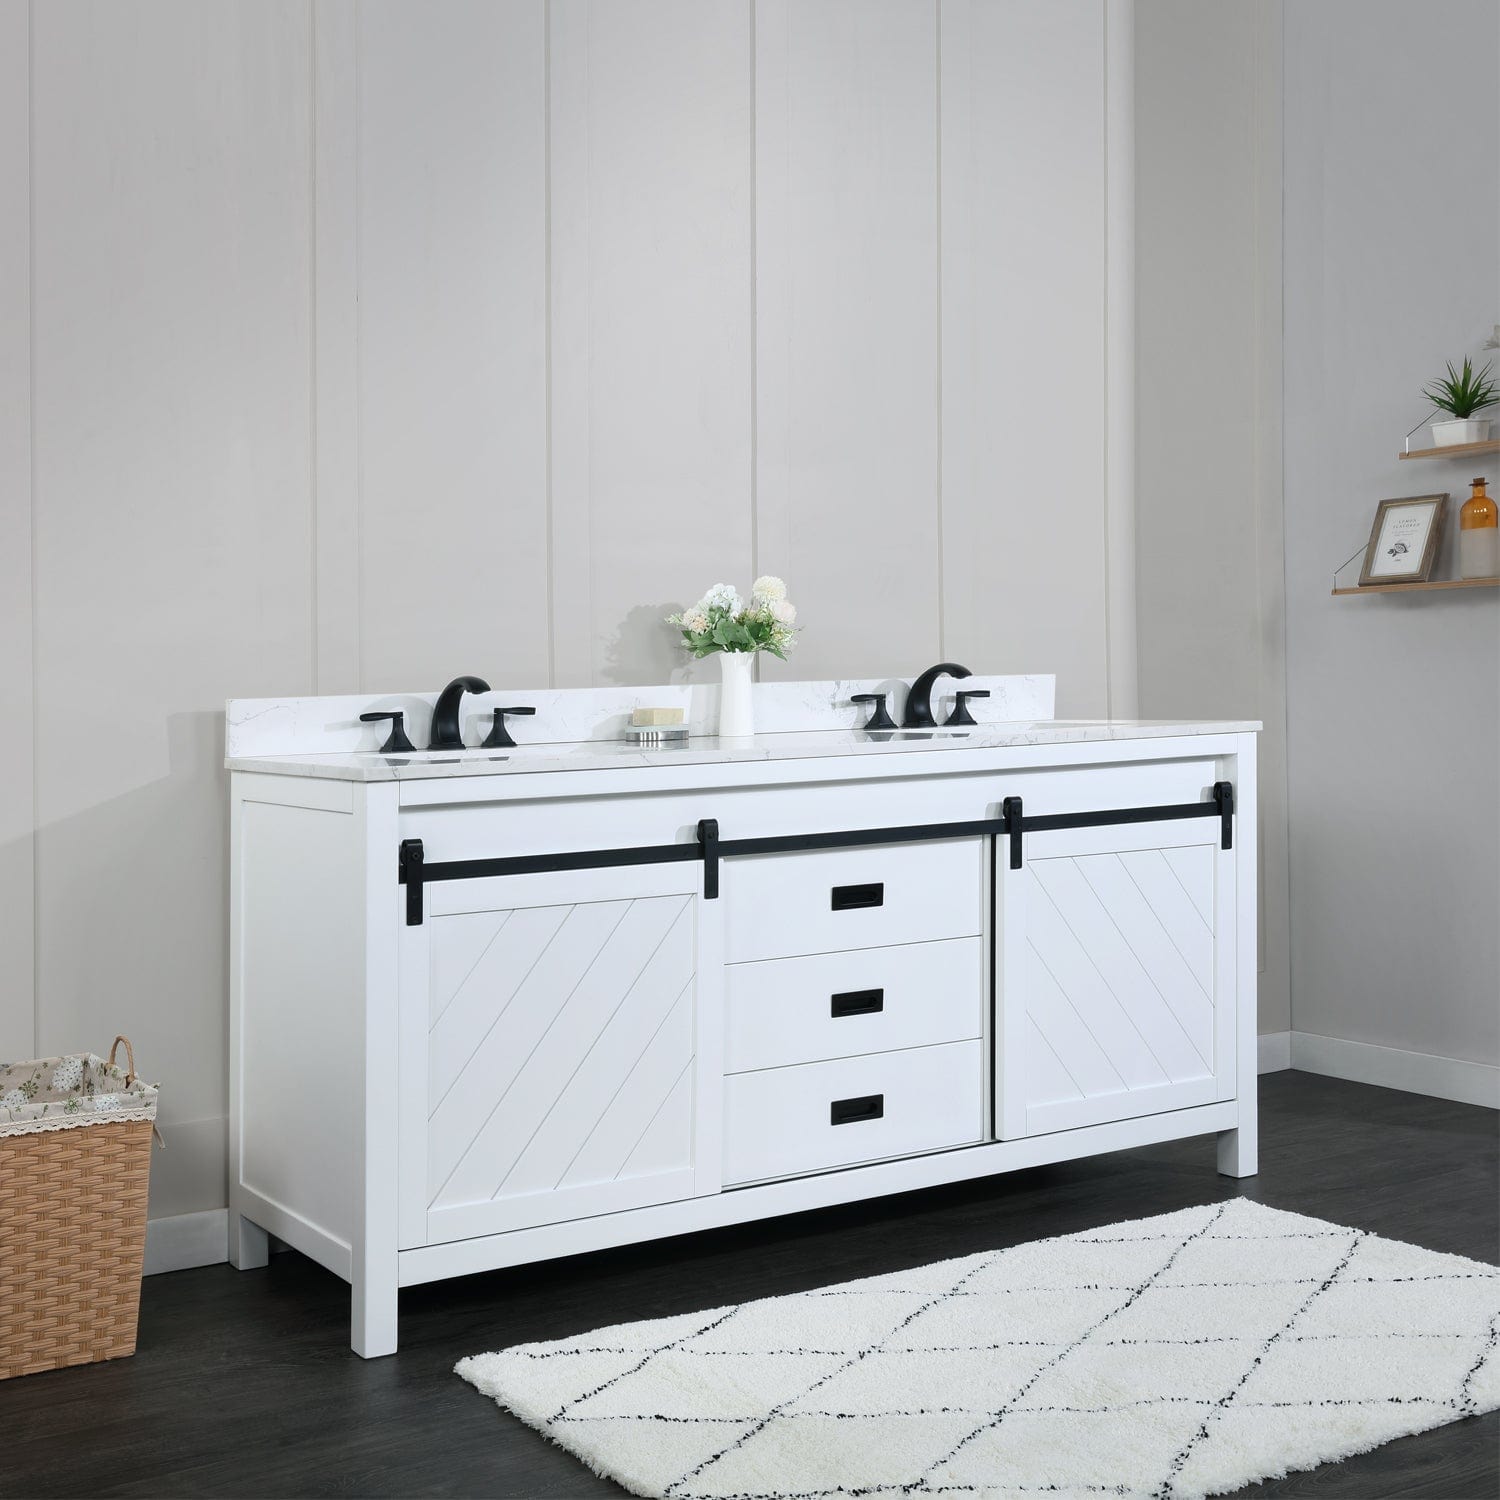 Altair Kinsley 72" Double Bathroom Vanity Set in White and Carrara White Marble Countertop without Mirror 536072-WH-AW-NM - Molaix696952511307Vanity536072-WH-AW-NM